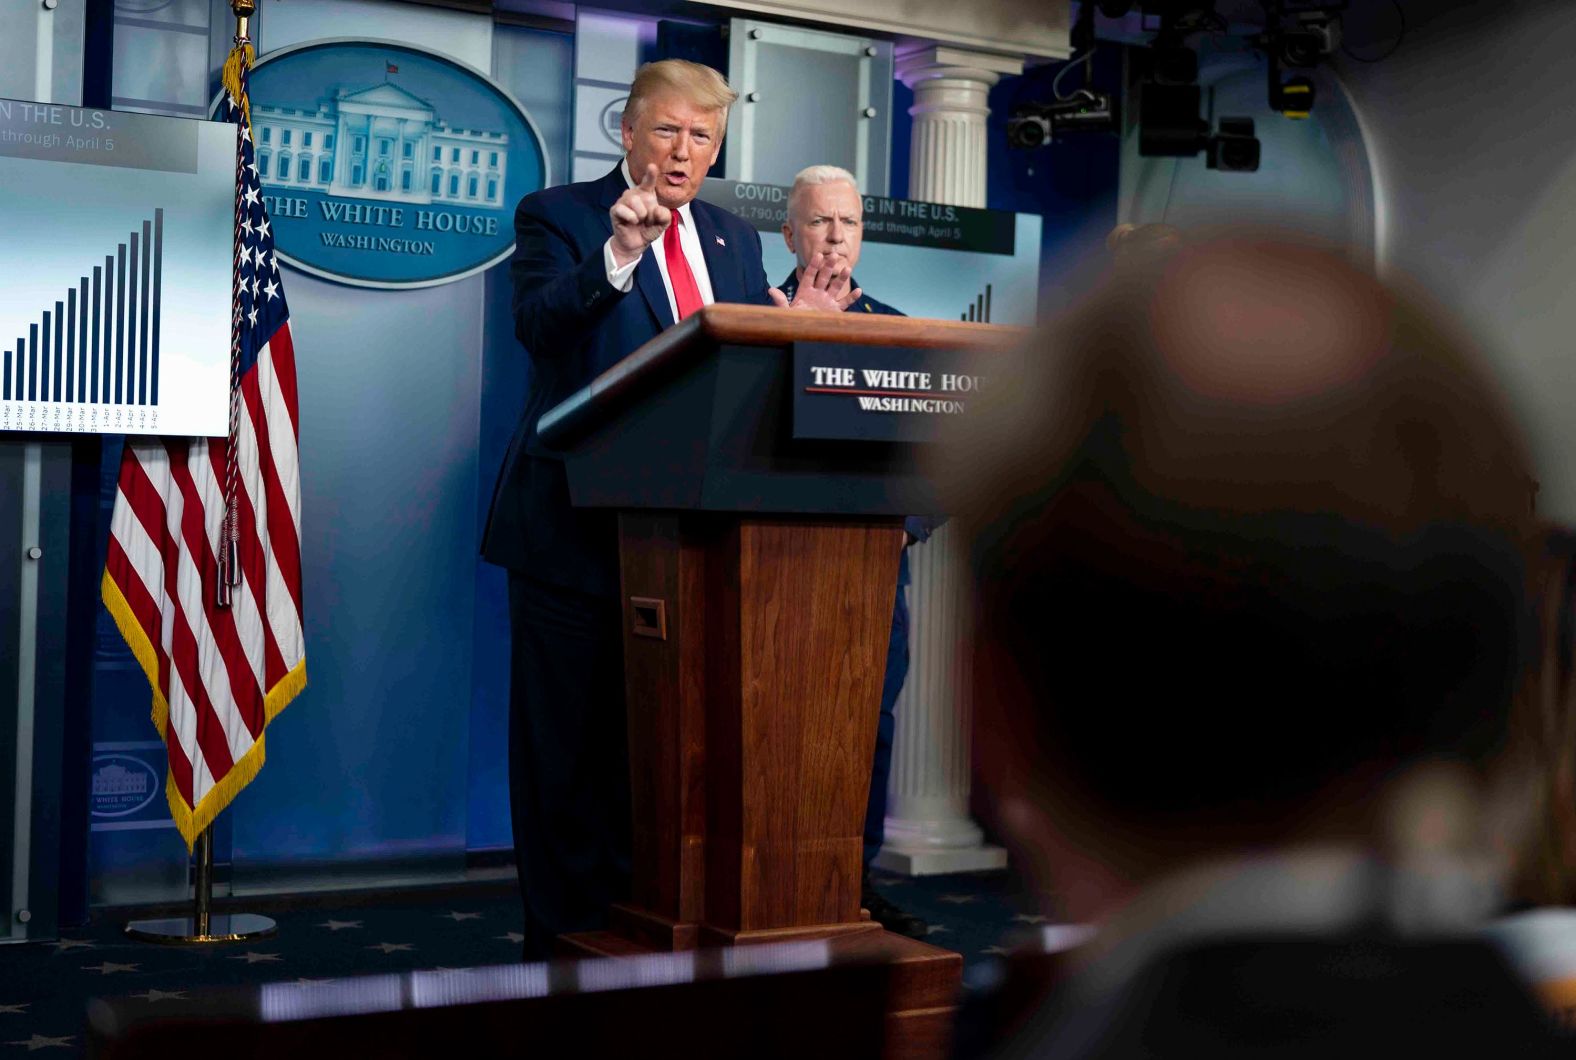 Trump speaks to members of the press during the coronavirus briefing on April 6. When asked about a <a href="index.php?page=&url=https%3A%2F%2Fwww.cnn.com%2F2020%2F04%2F06%2Fpolitics%2Fdepartment-of-health-and-human-services-shortages%2Findex.html" target="_blank">report</a> detailing the challenges US hospitals were facing as they battled the coronavirus, Trump <a href="index.php?page=&url=https%3A%2F%2Fwww.cnn.com%2F2020%2F04%2F06%2Fpolitics%2Ffact-check-trump-coronavirus-briefing-april-6%2Findex.html" target="_blank">repeatedly criticized reporters and frequently departed from his prepared text.</a> When Admiral Dr. Brett Giroir, pictured behind Trump, spoke about Covid-19 testing, he said, "I don't know the inspector general. I don't know that person." Trump then asked reporters in the room if they knew how long the inspector general had been in government. ABC News' Jonathan Karl, seated in the foreground, responded that Christi Grimm, the principal deputy inspector general for the Department of Health and Human Services, "did serve in the previous administration." Trump responded: "Oh, you didn't tell me that. Oh, I see. You didn't tell me that, Jon. You didn't tell me that. ... You mean the Obama administration. Thank you for telling me that. See, there's the typical fake-news deal. Look, you're a third-rate reporter. And what you just said is a disgrace, O.K.? ... Thank you very much, Jon. Thank you very much. You will never make it."